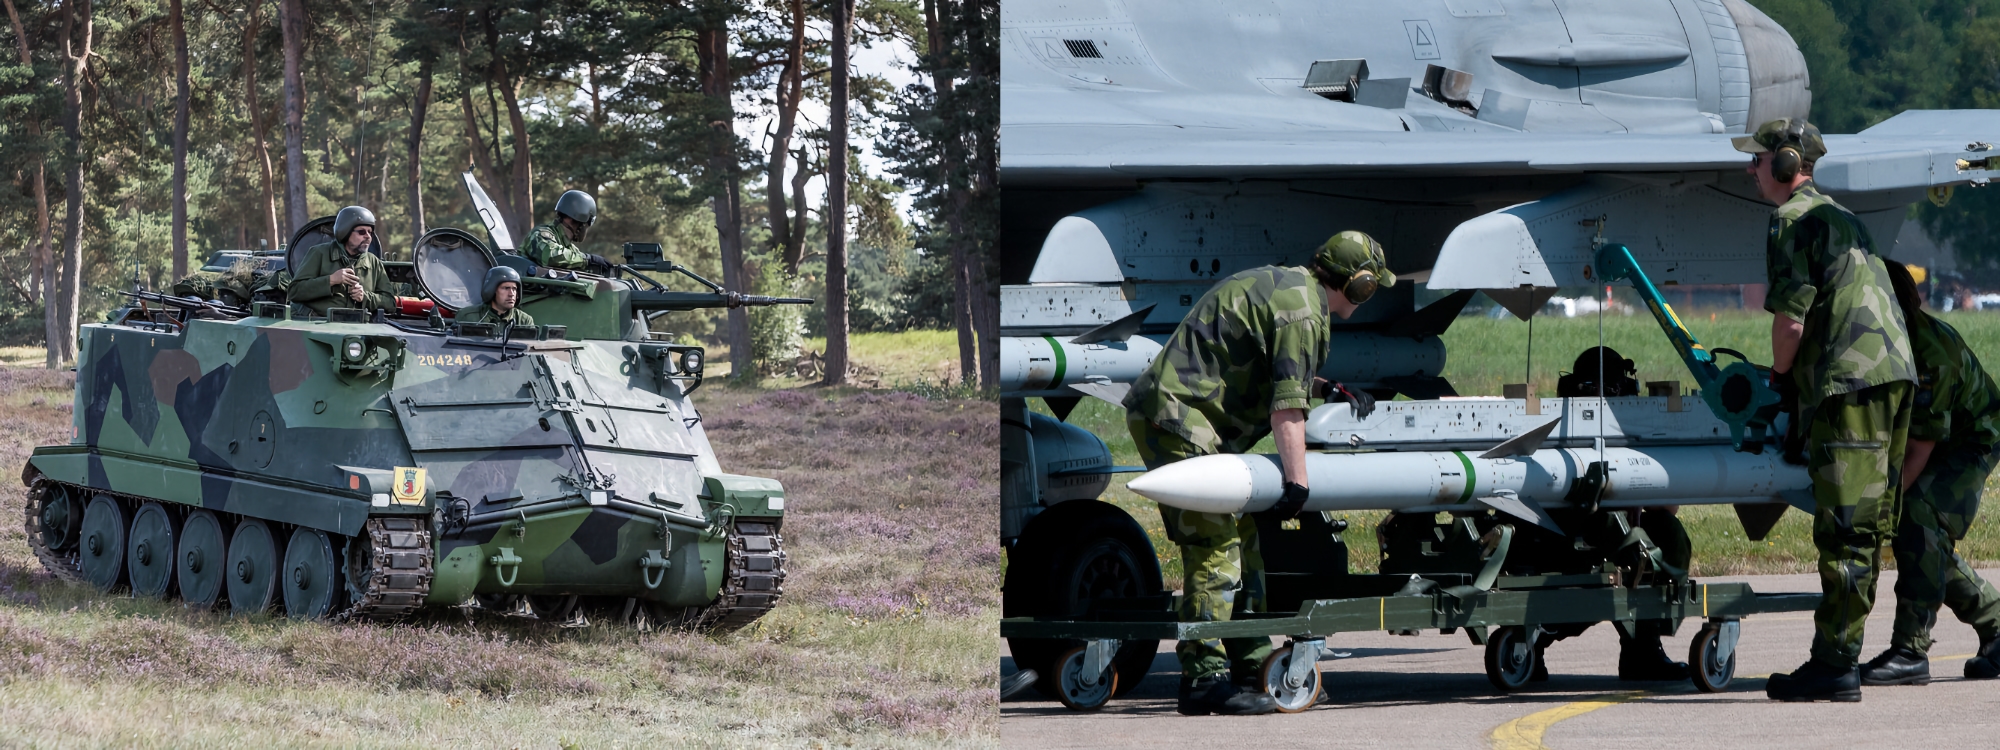 Not only Saab ASC 890 aircraft: Sweden will also send Pansarbandvagn 302 armoured personnel carriers, Rb 99 missiles and artillery shells to Ukraine